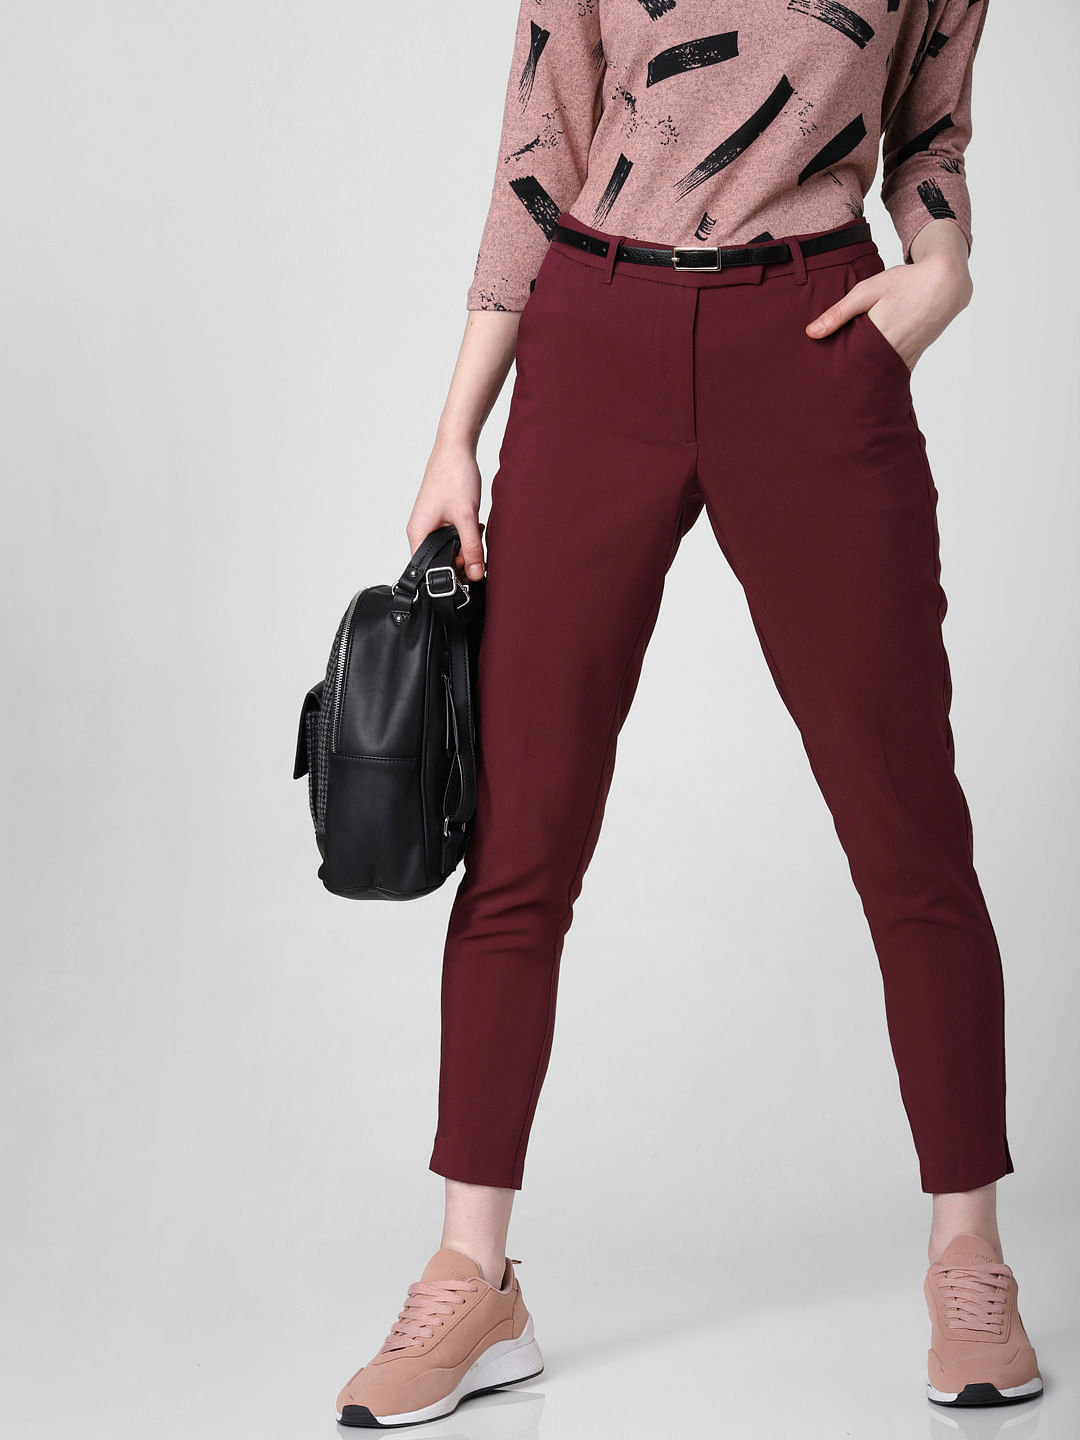 Buy Burgundy Trousers  Pants for Women by The Dry State Online  Ajiocom